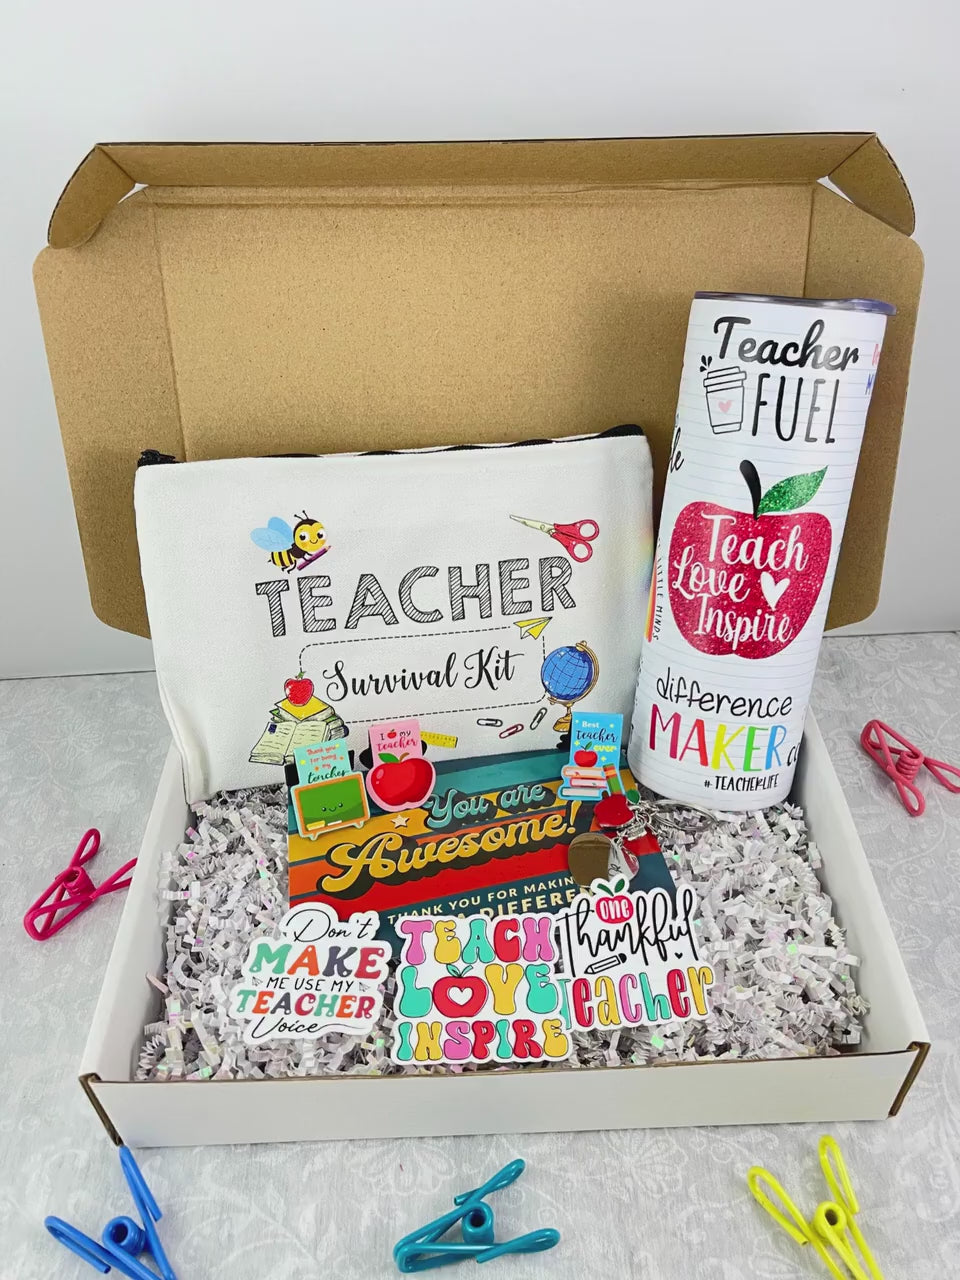 Tips Ideas For Giving The Best Teacher Gifts Ever | Best teacher gifts,  School teacher gifts, Teacher gifts